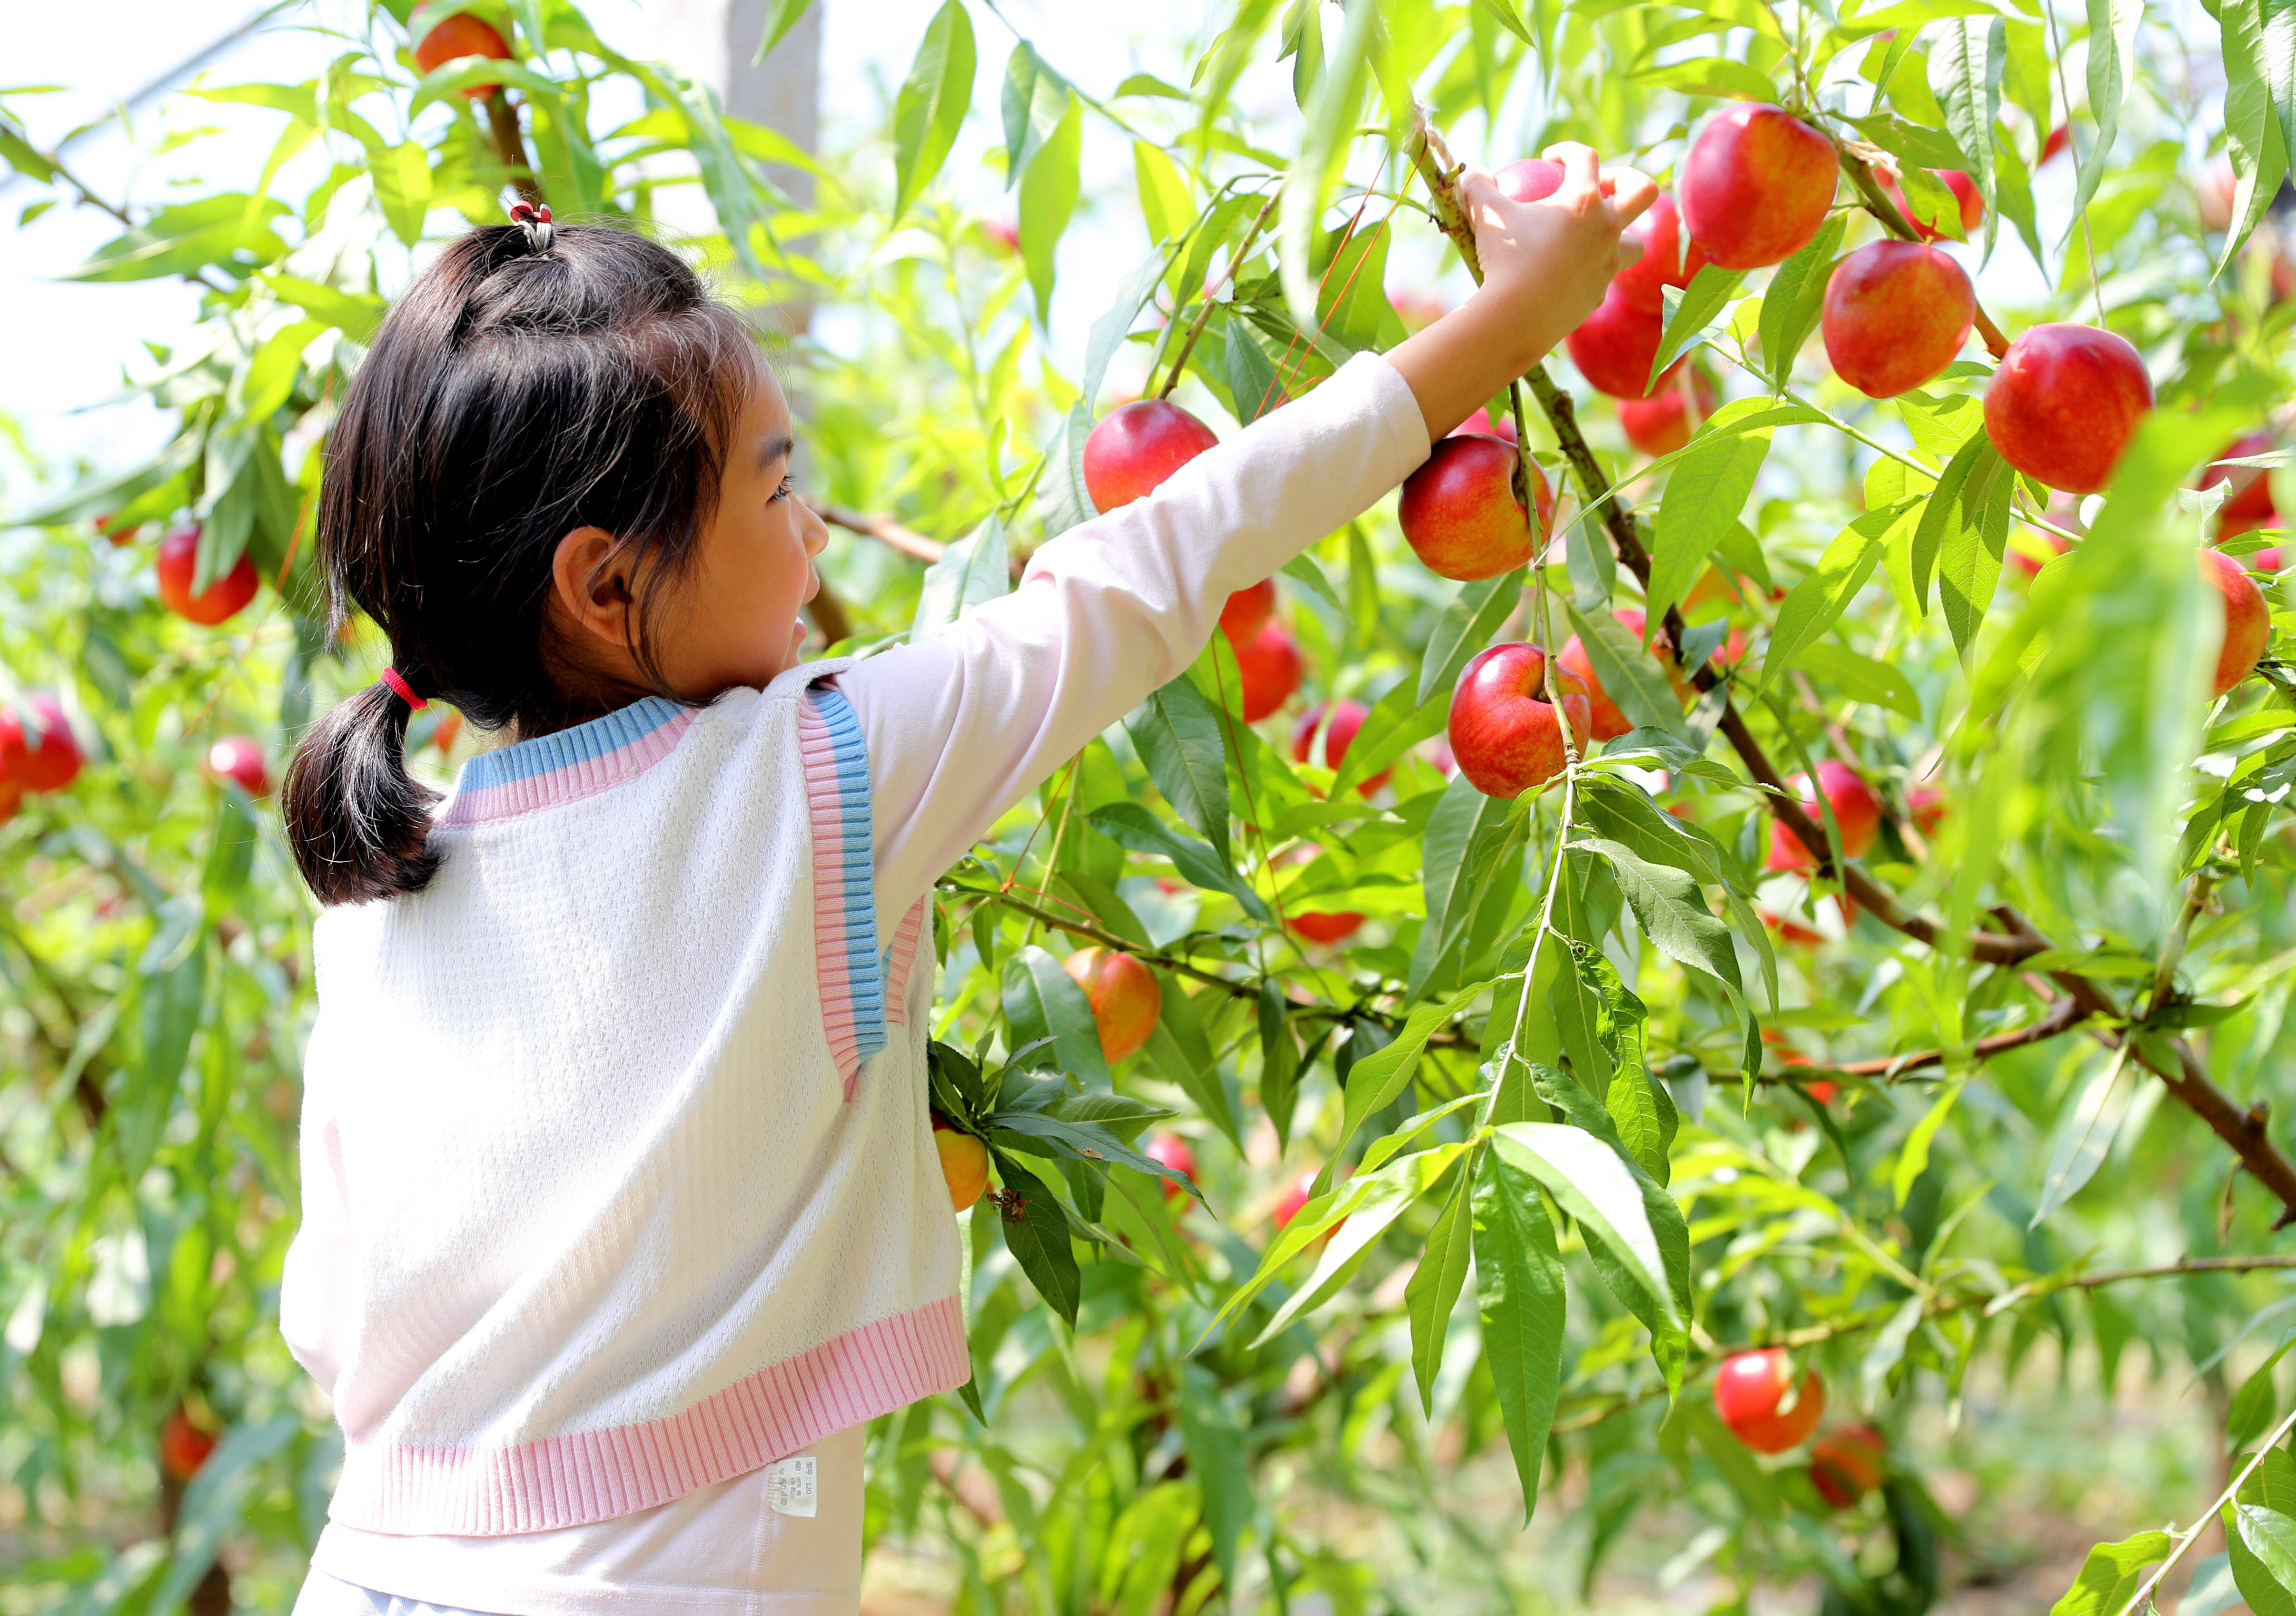  Laixi nectarine goes on the market, "Yinghong" fruit farmer makes a fortune